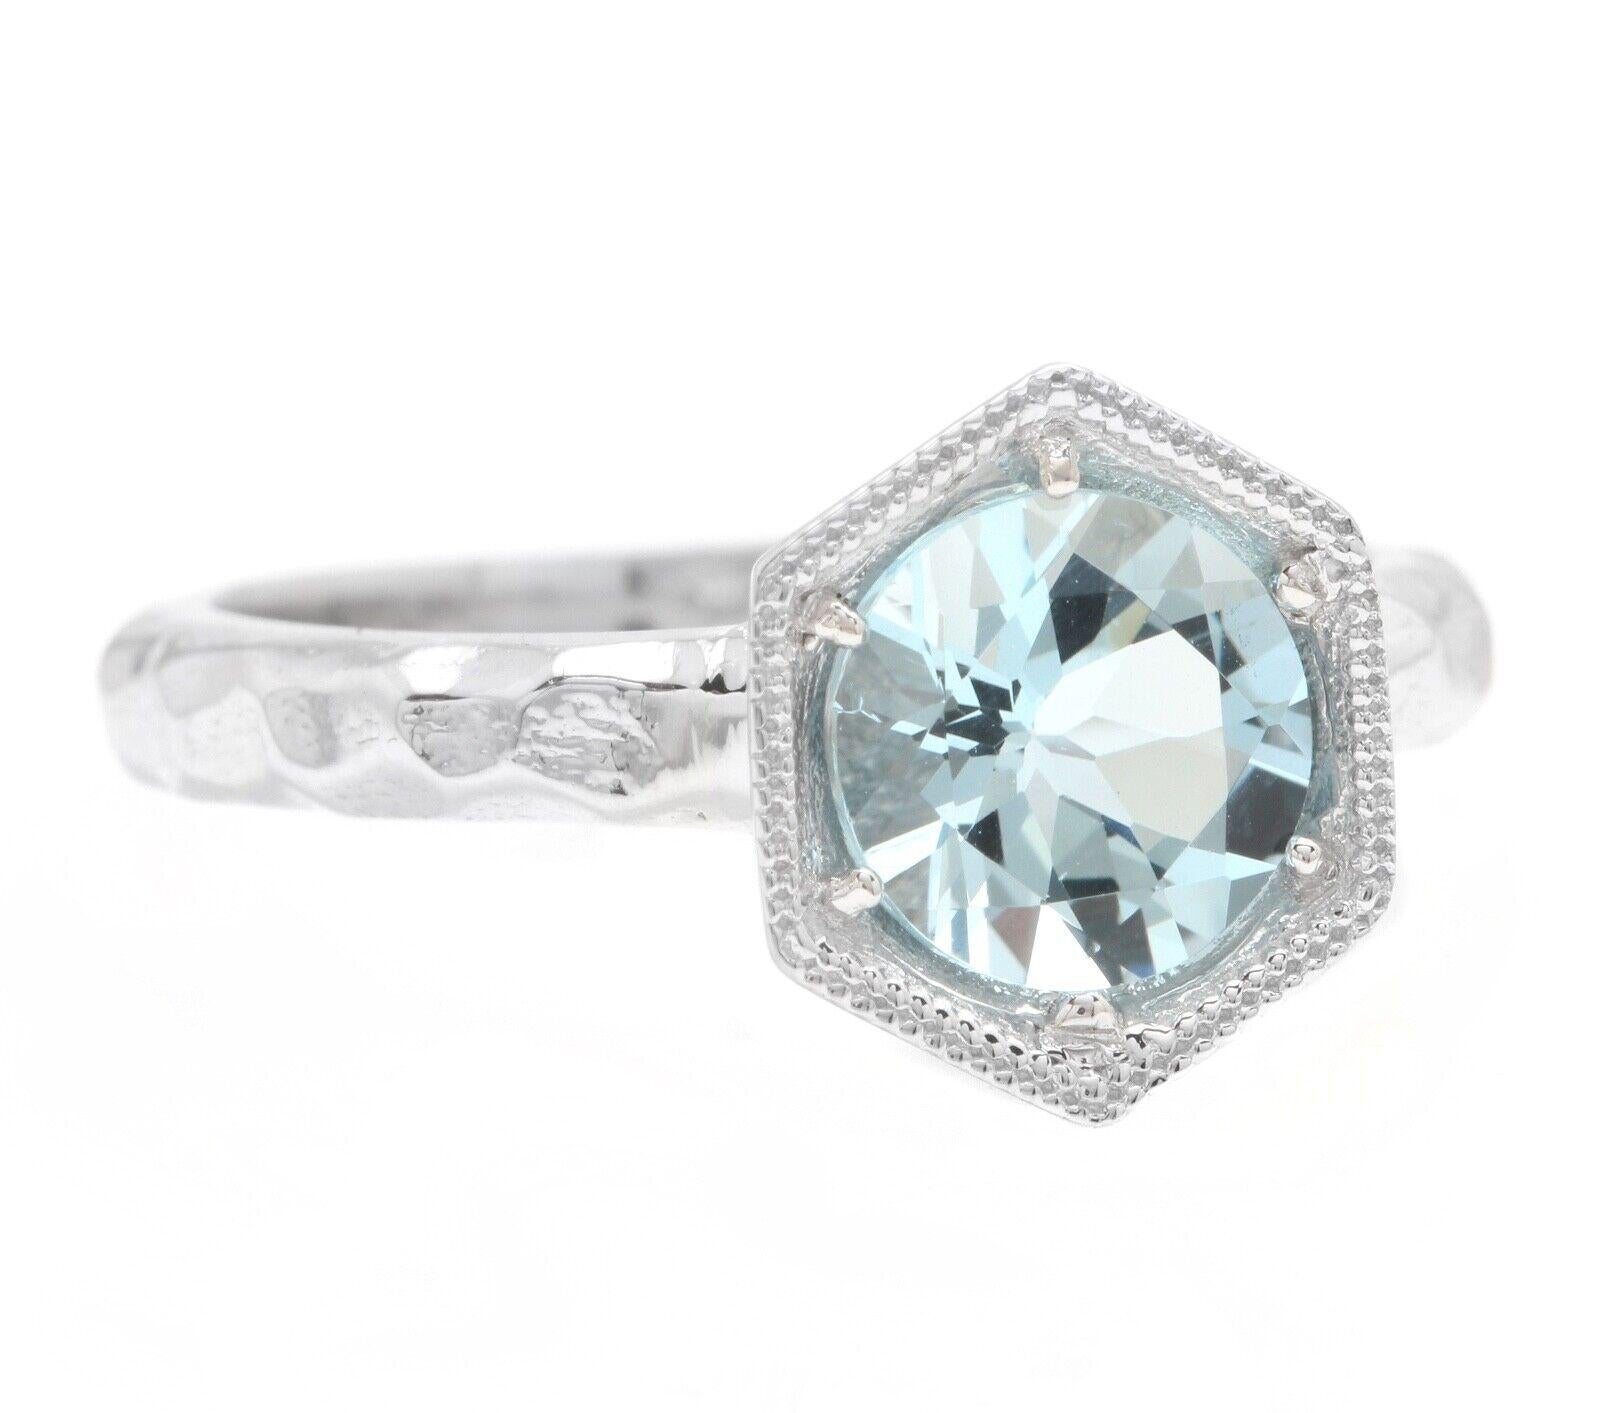 1.25 Carat Exquisite Natural Aquamarine 14K Solid White Gold Ring

Total Natural Aquamarine Weight is: Approx. 1.25 Carats 

Aquamarine Measures: Approx. 7.00mm

Aquamarine Treatment: Heating

Ring size: 6.5

Ring total weight: 3.8